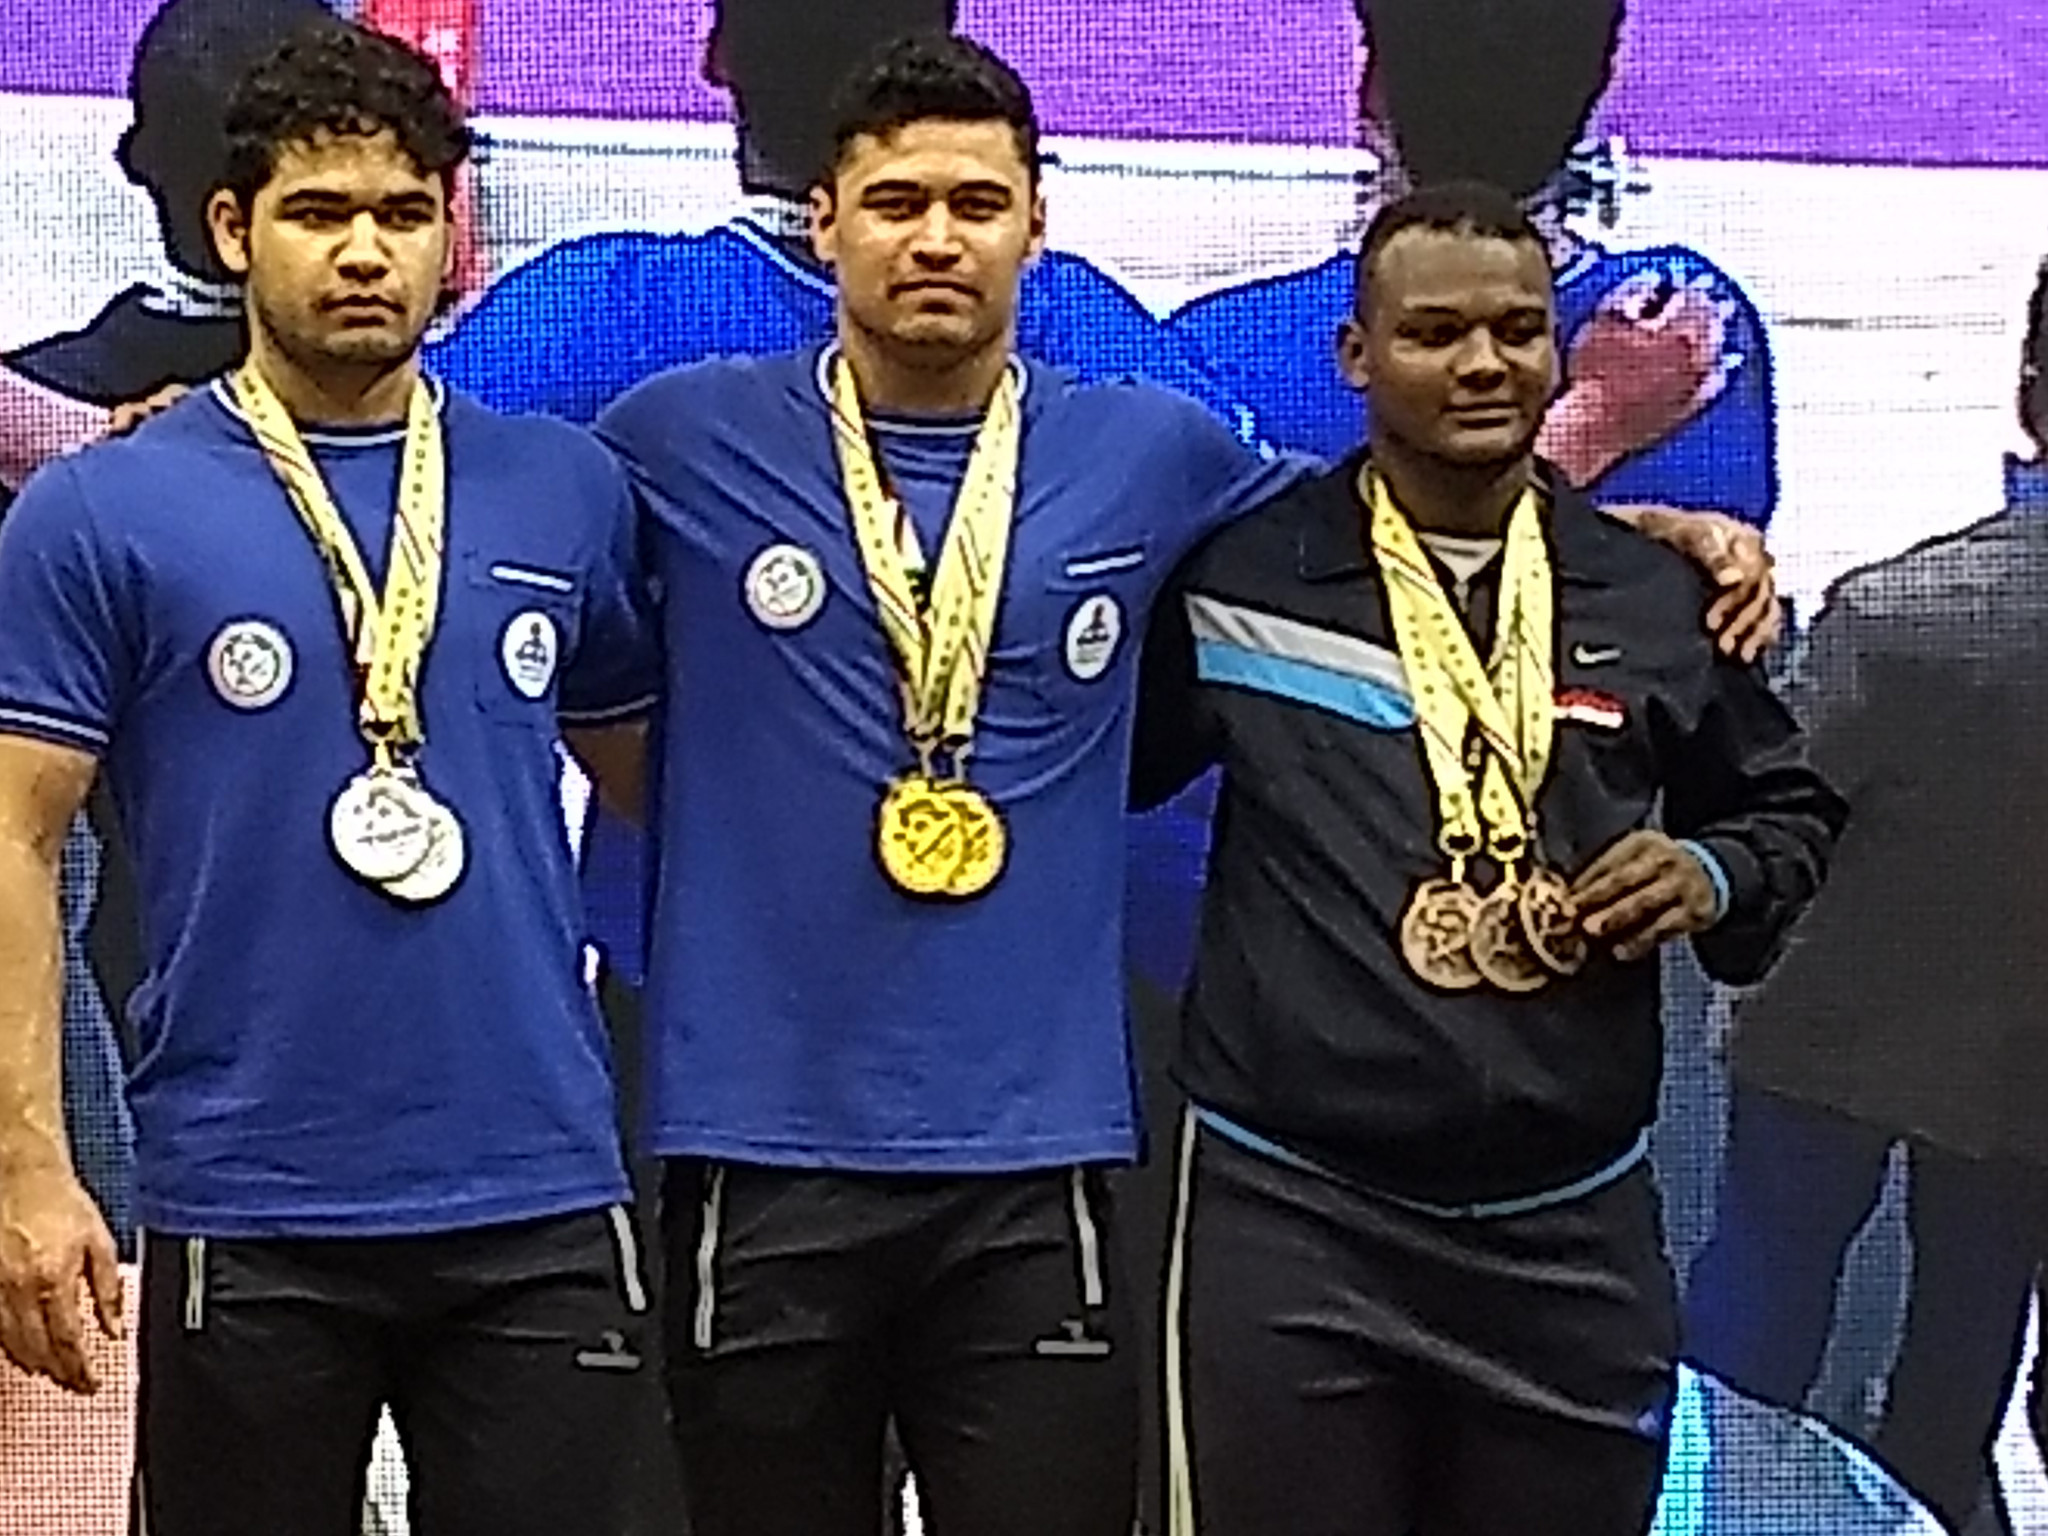 Hasan Ali, right, won a bronze medal in the 94kg category at the Fajr Cup after enduring a marathon seven-day journey from Yemen to get to the event in Iran ©Brian Oliver